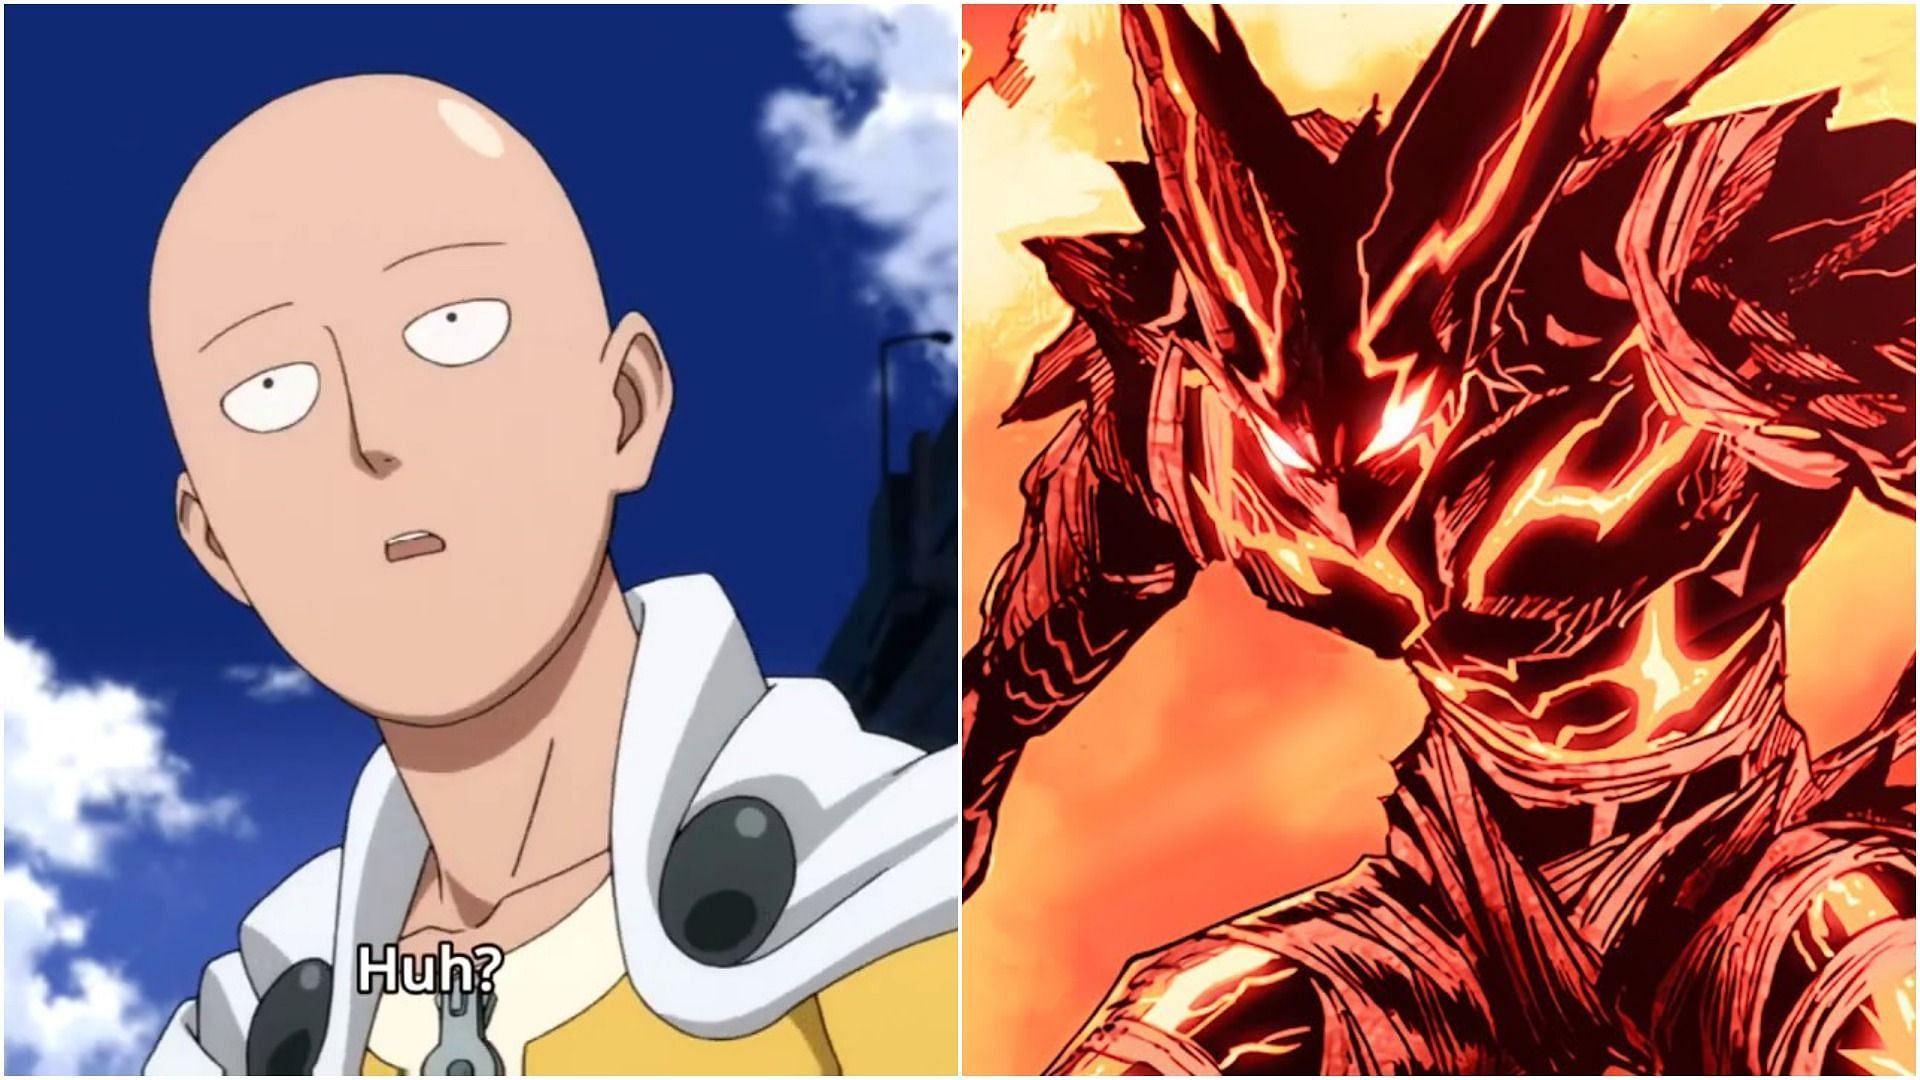 What is the highest level that Garou from One Punch Man can reach